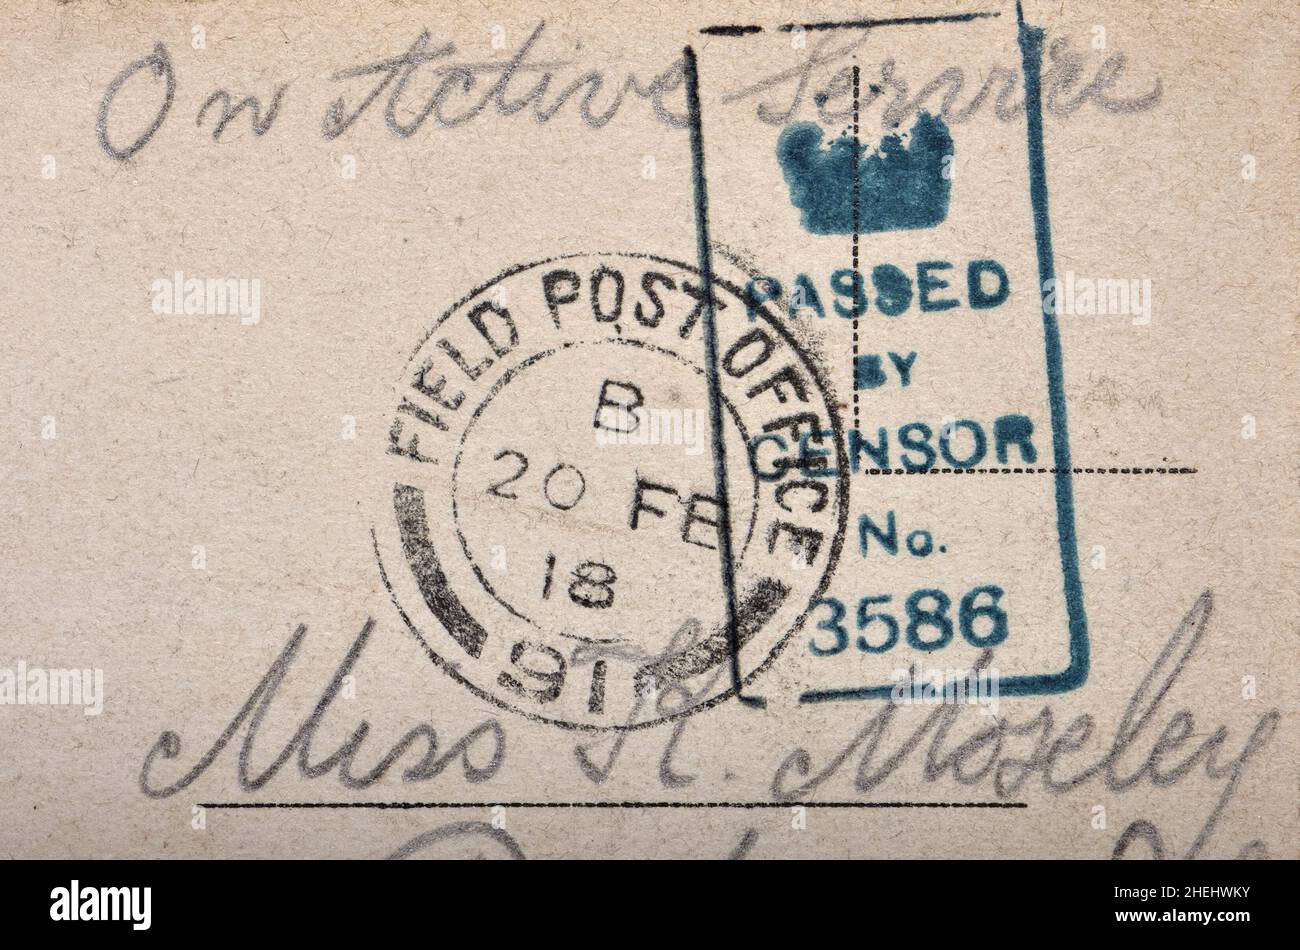 Letter posted during the First World War with a stamp to show it was passed by censors. Stock Photo